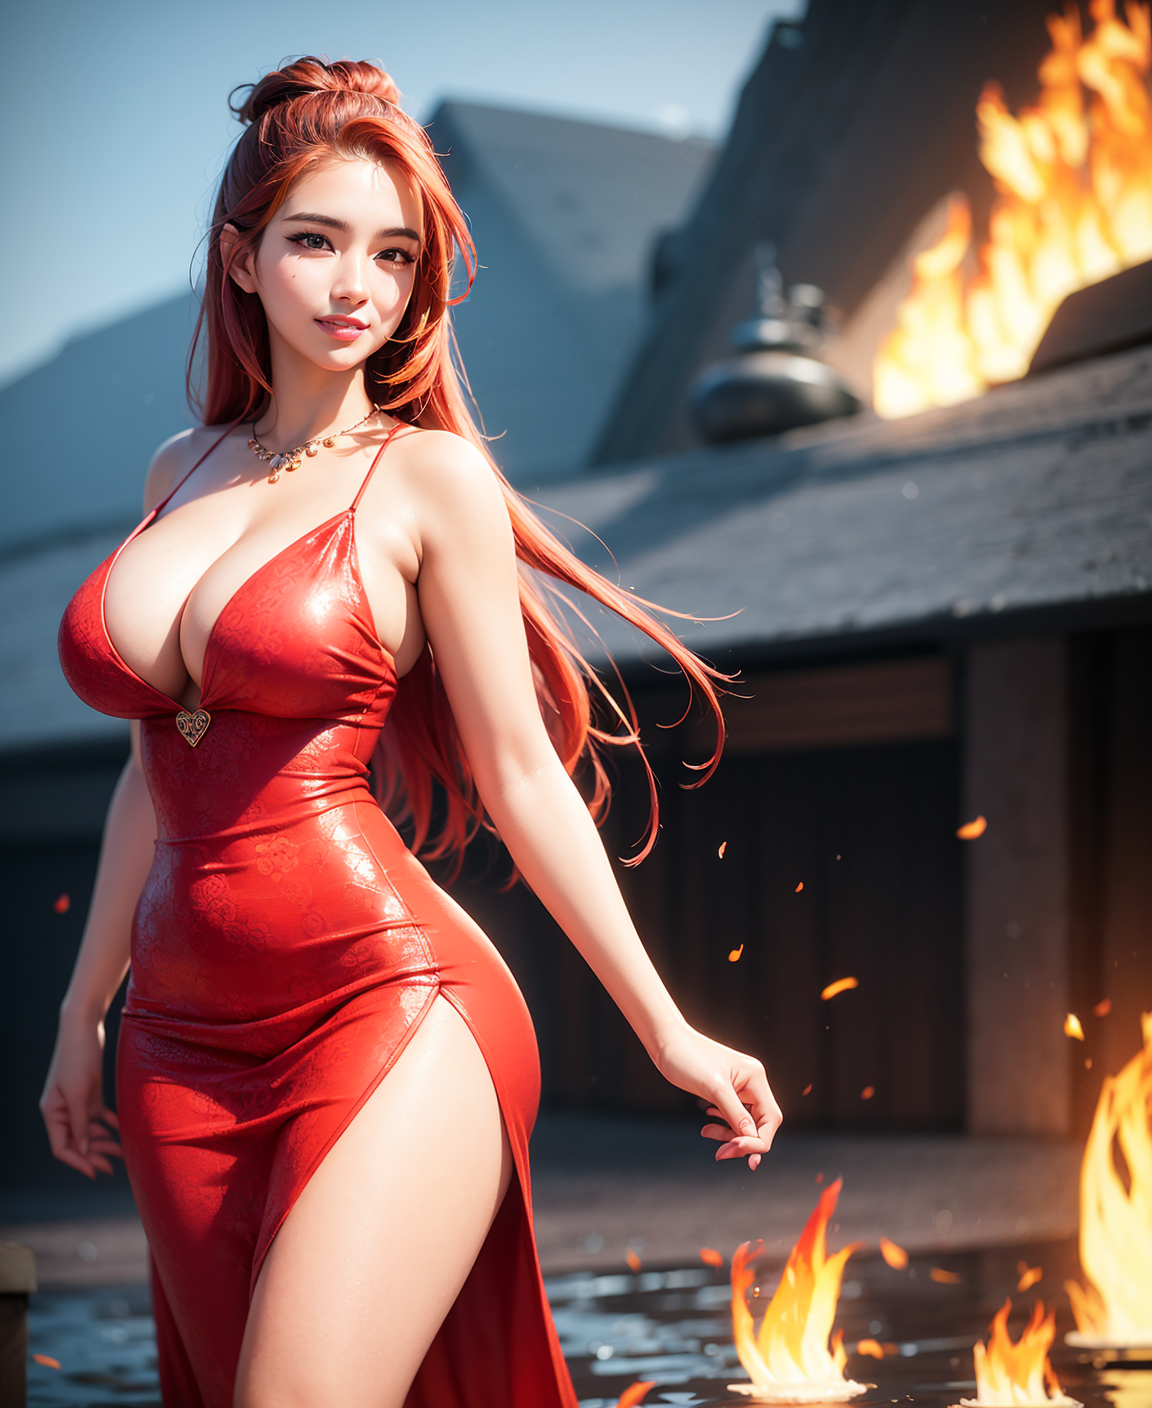 General 1152x1408 AIbot AI art tight dress fire big boobs thighs women Asian portrait display dress looking at viewer redhead cleavage tight clothing red dress